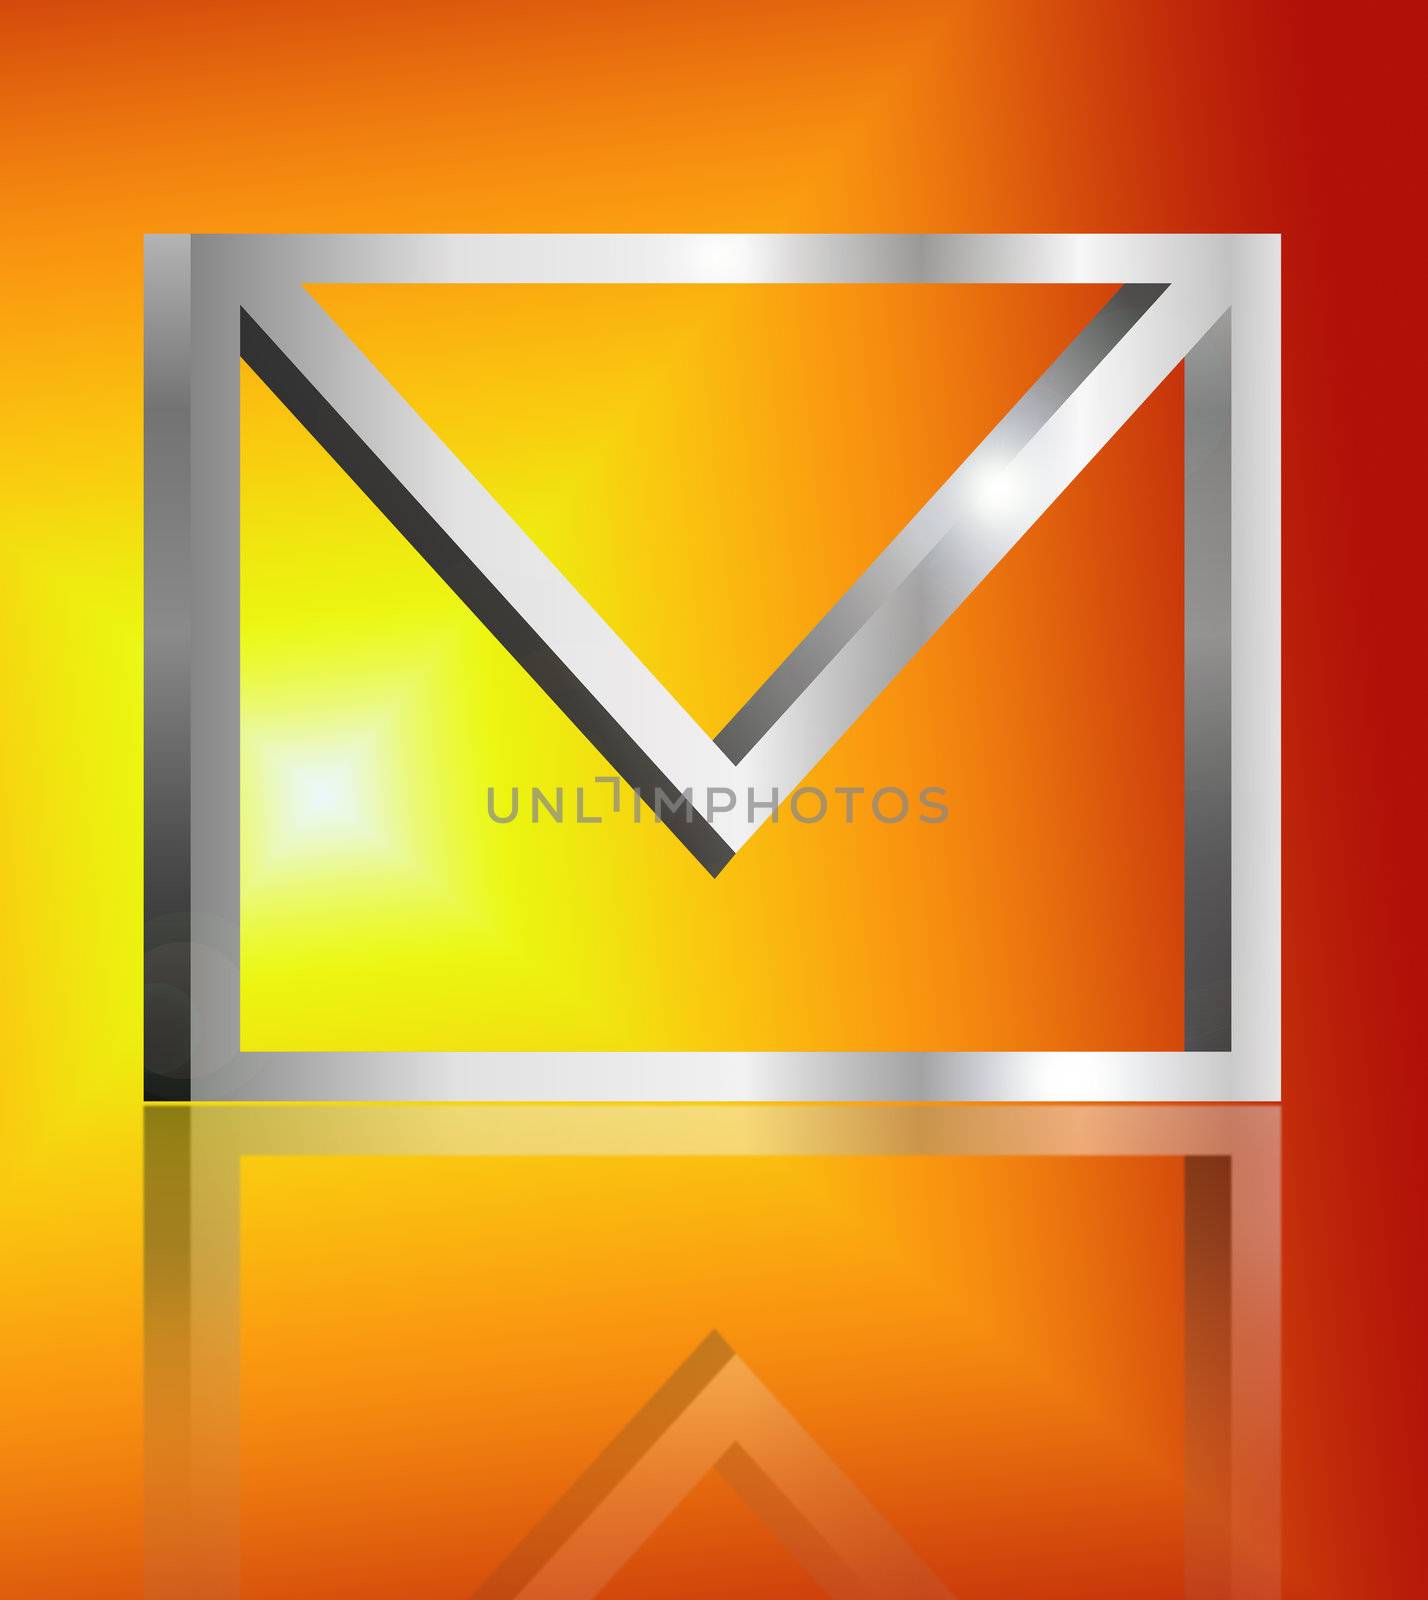 Illustration depicting a single metallic email symbol arranged over golden light effect and reflecting into foreground.